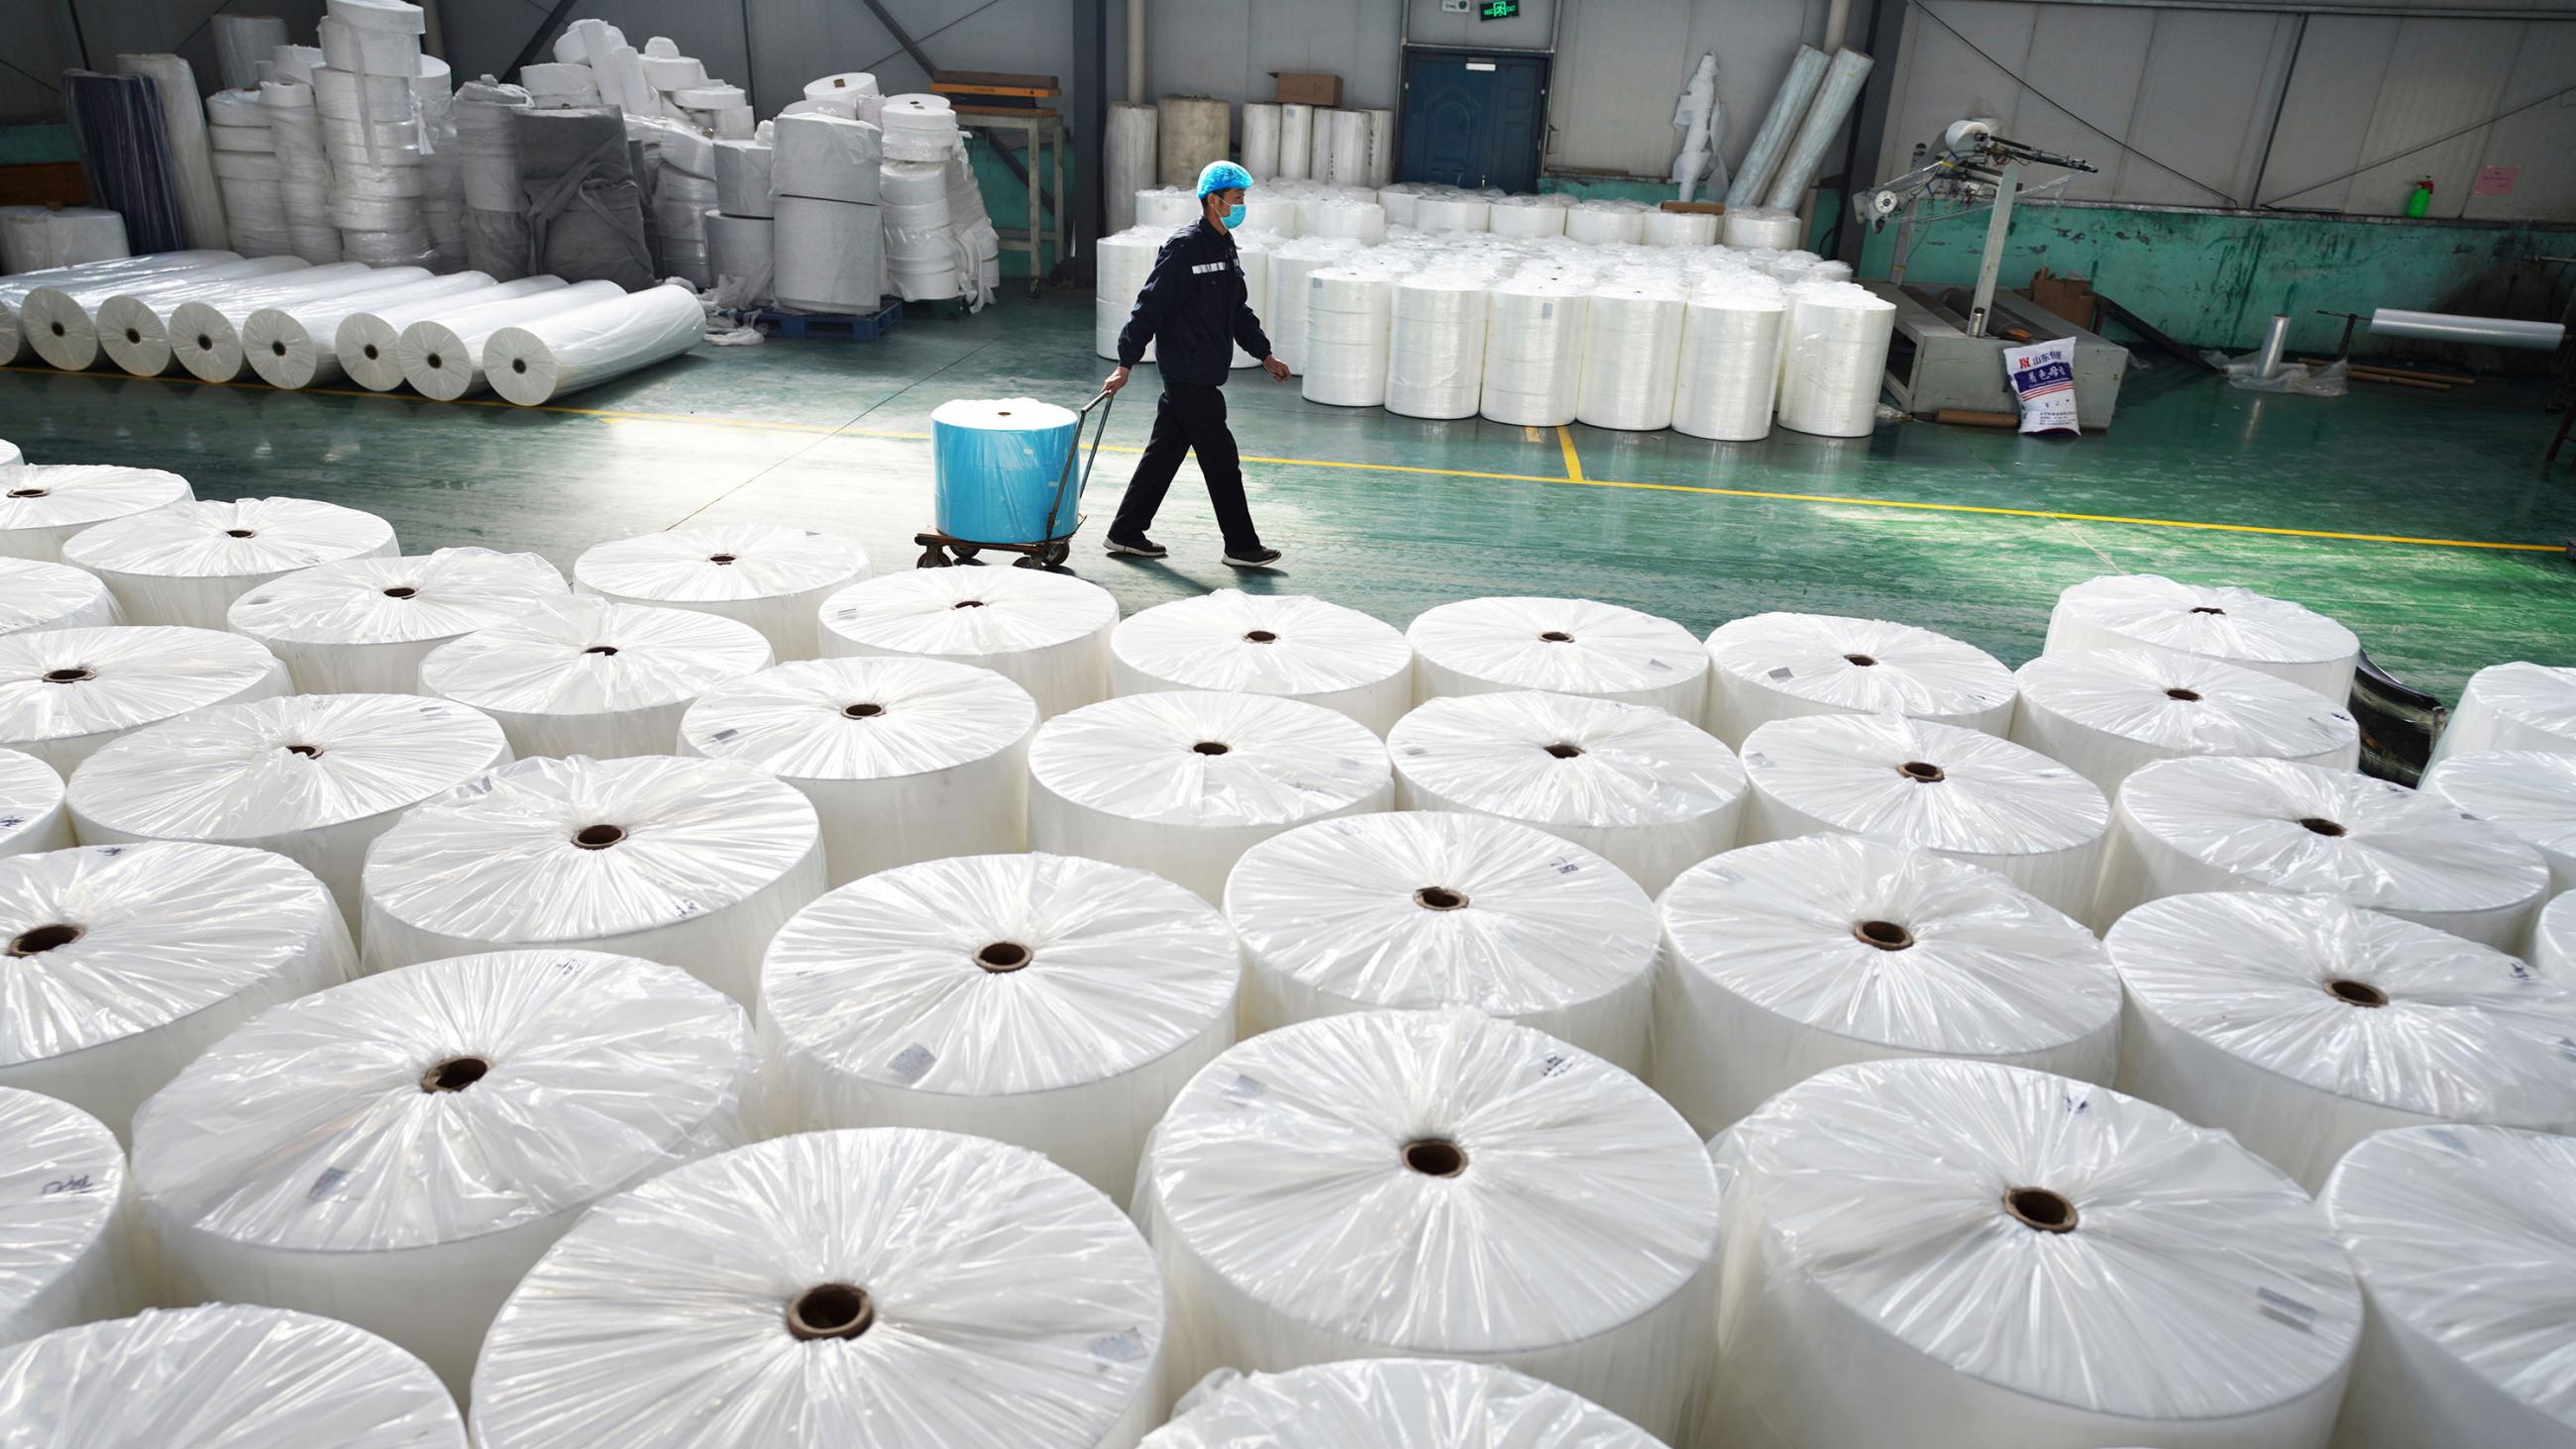 Picture shows a large factory space with a massive stack of large fabric spools in the foreground and a single worker waling by in the background. 